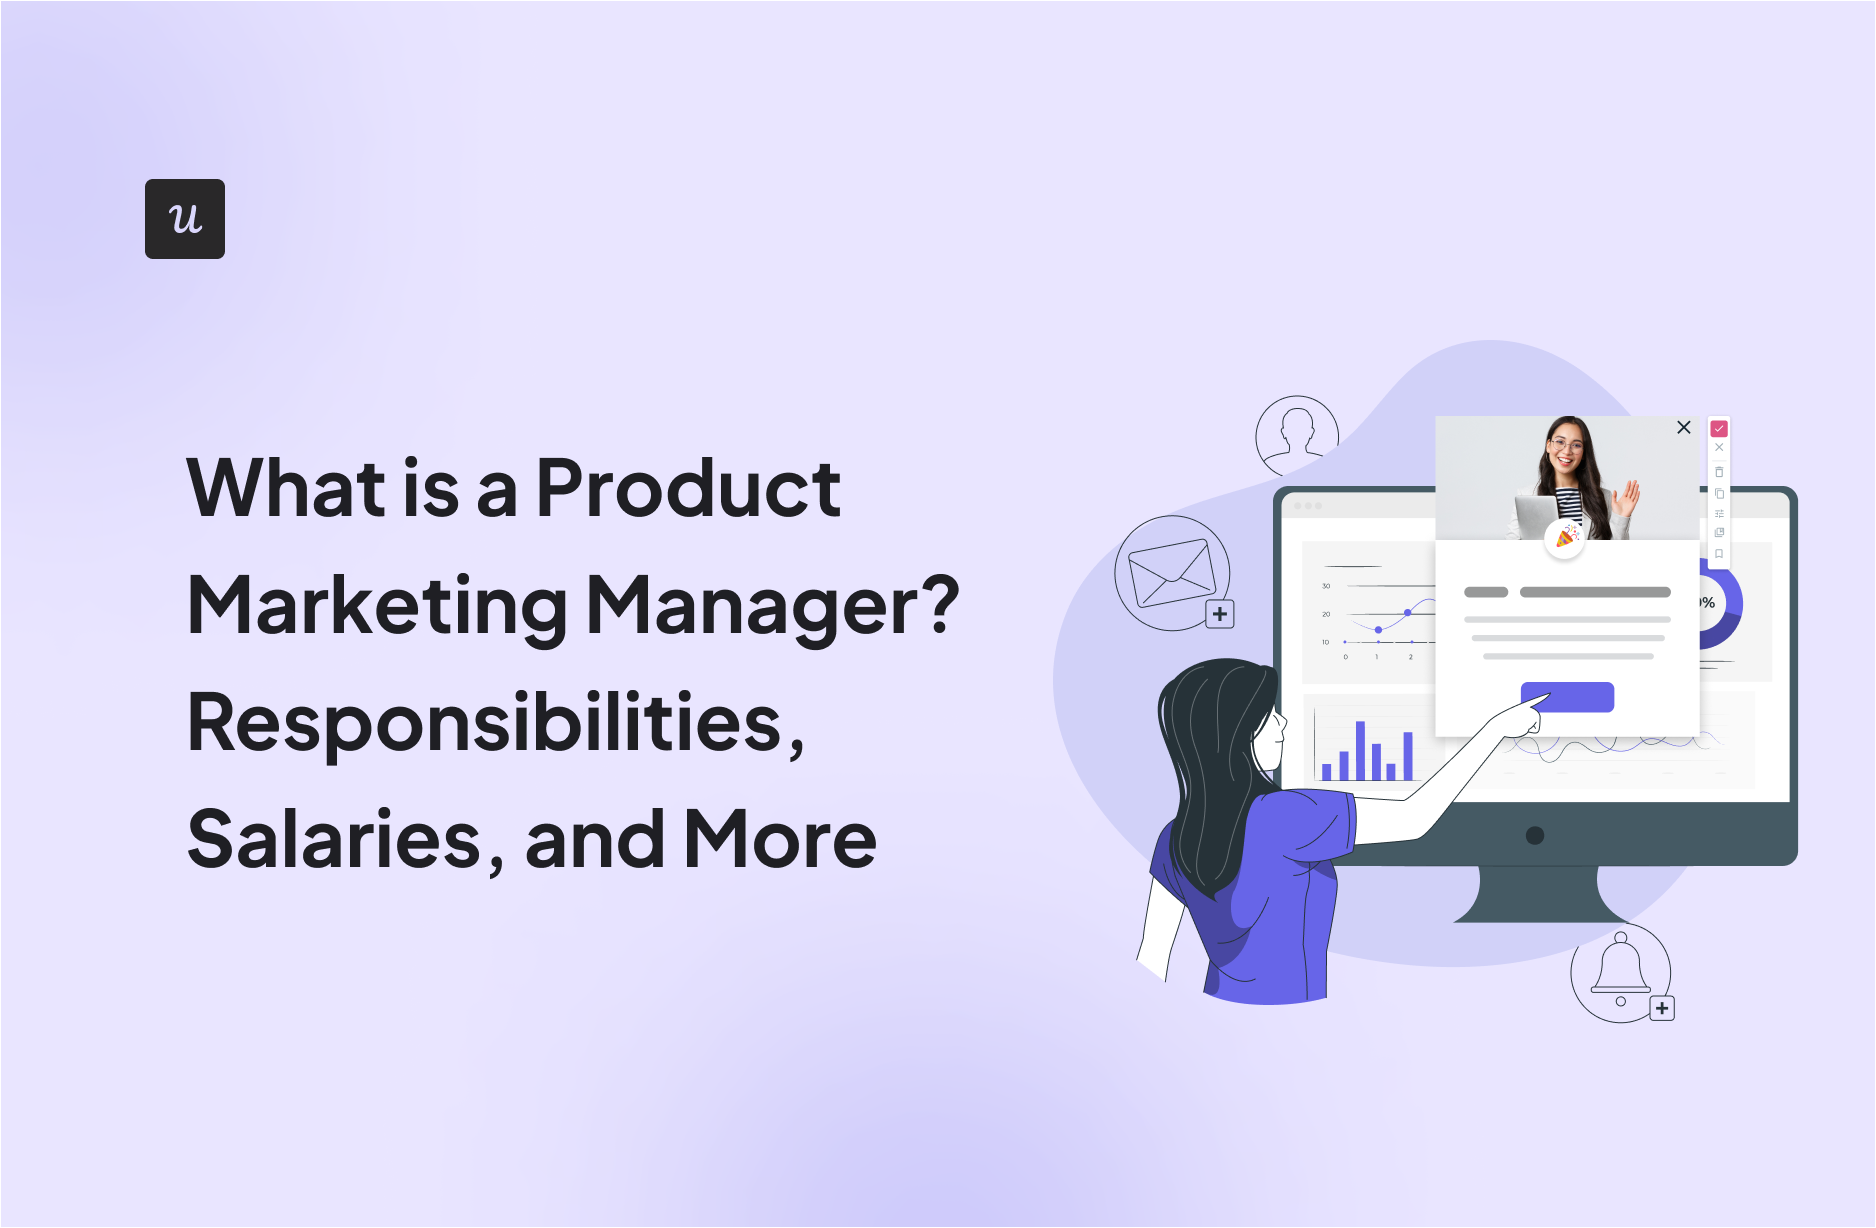 What is a Product Marketing Manager? Responsibilities, Salaries, and More